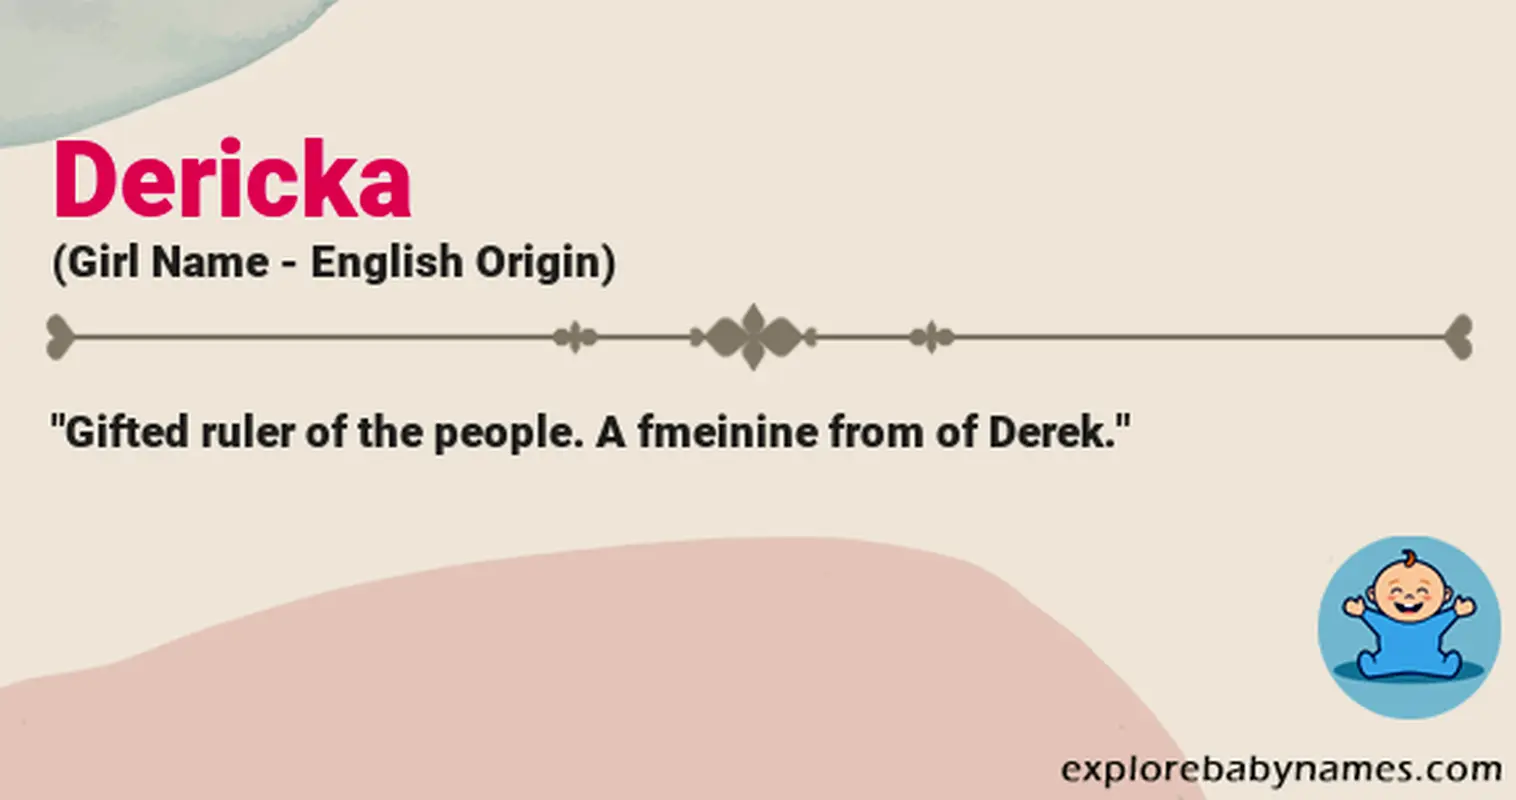 Meaning of Dericka